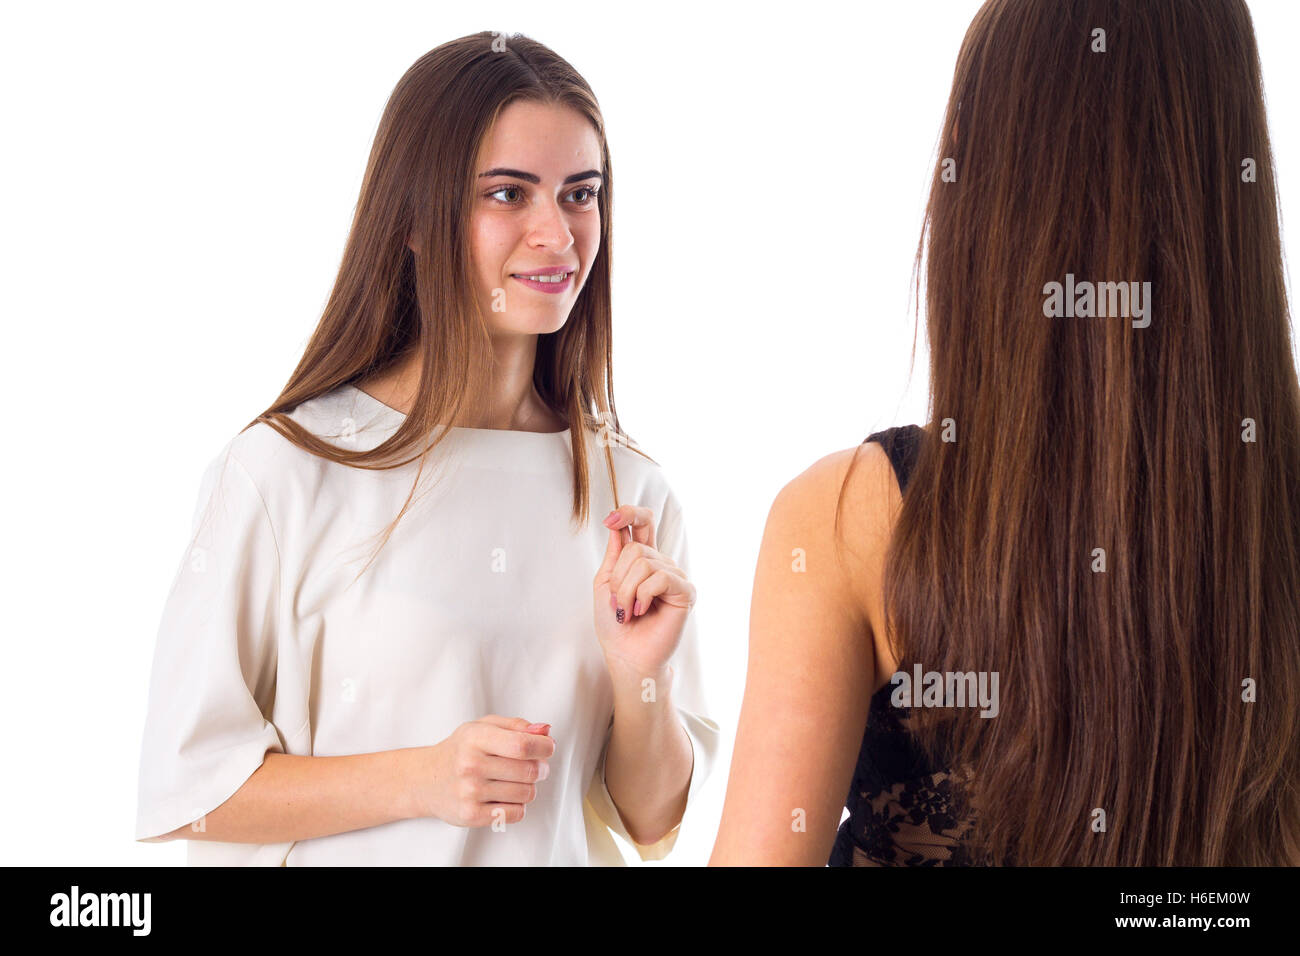 Two young woman talking Stock Photo